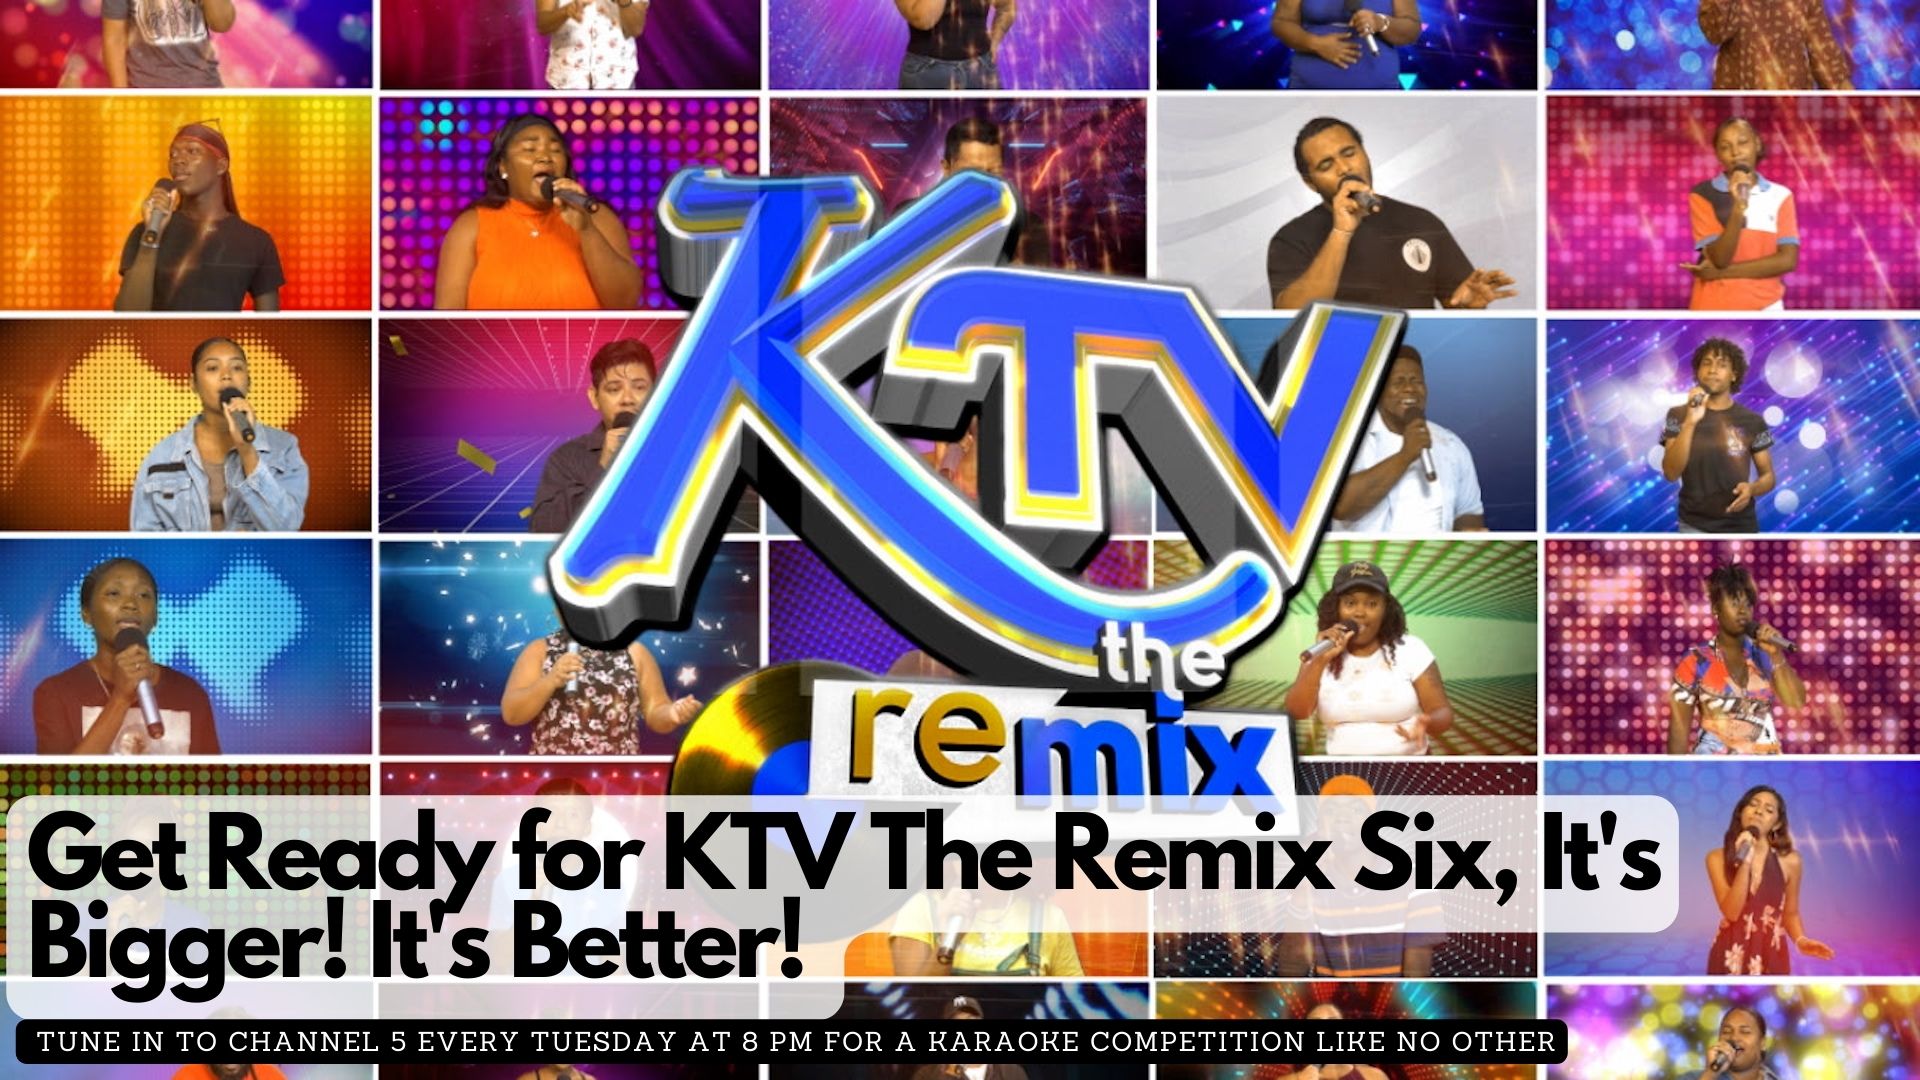 Get Ready for KTV The Remix Six, It's Bigger! It's Better! 